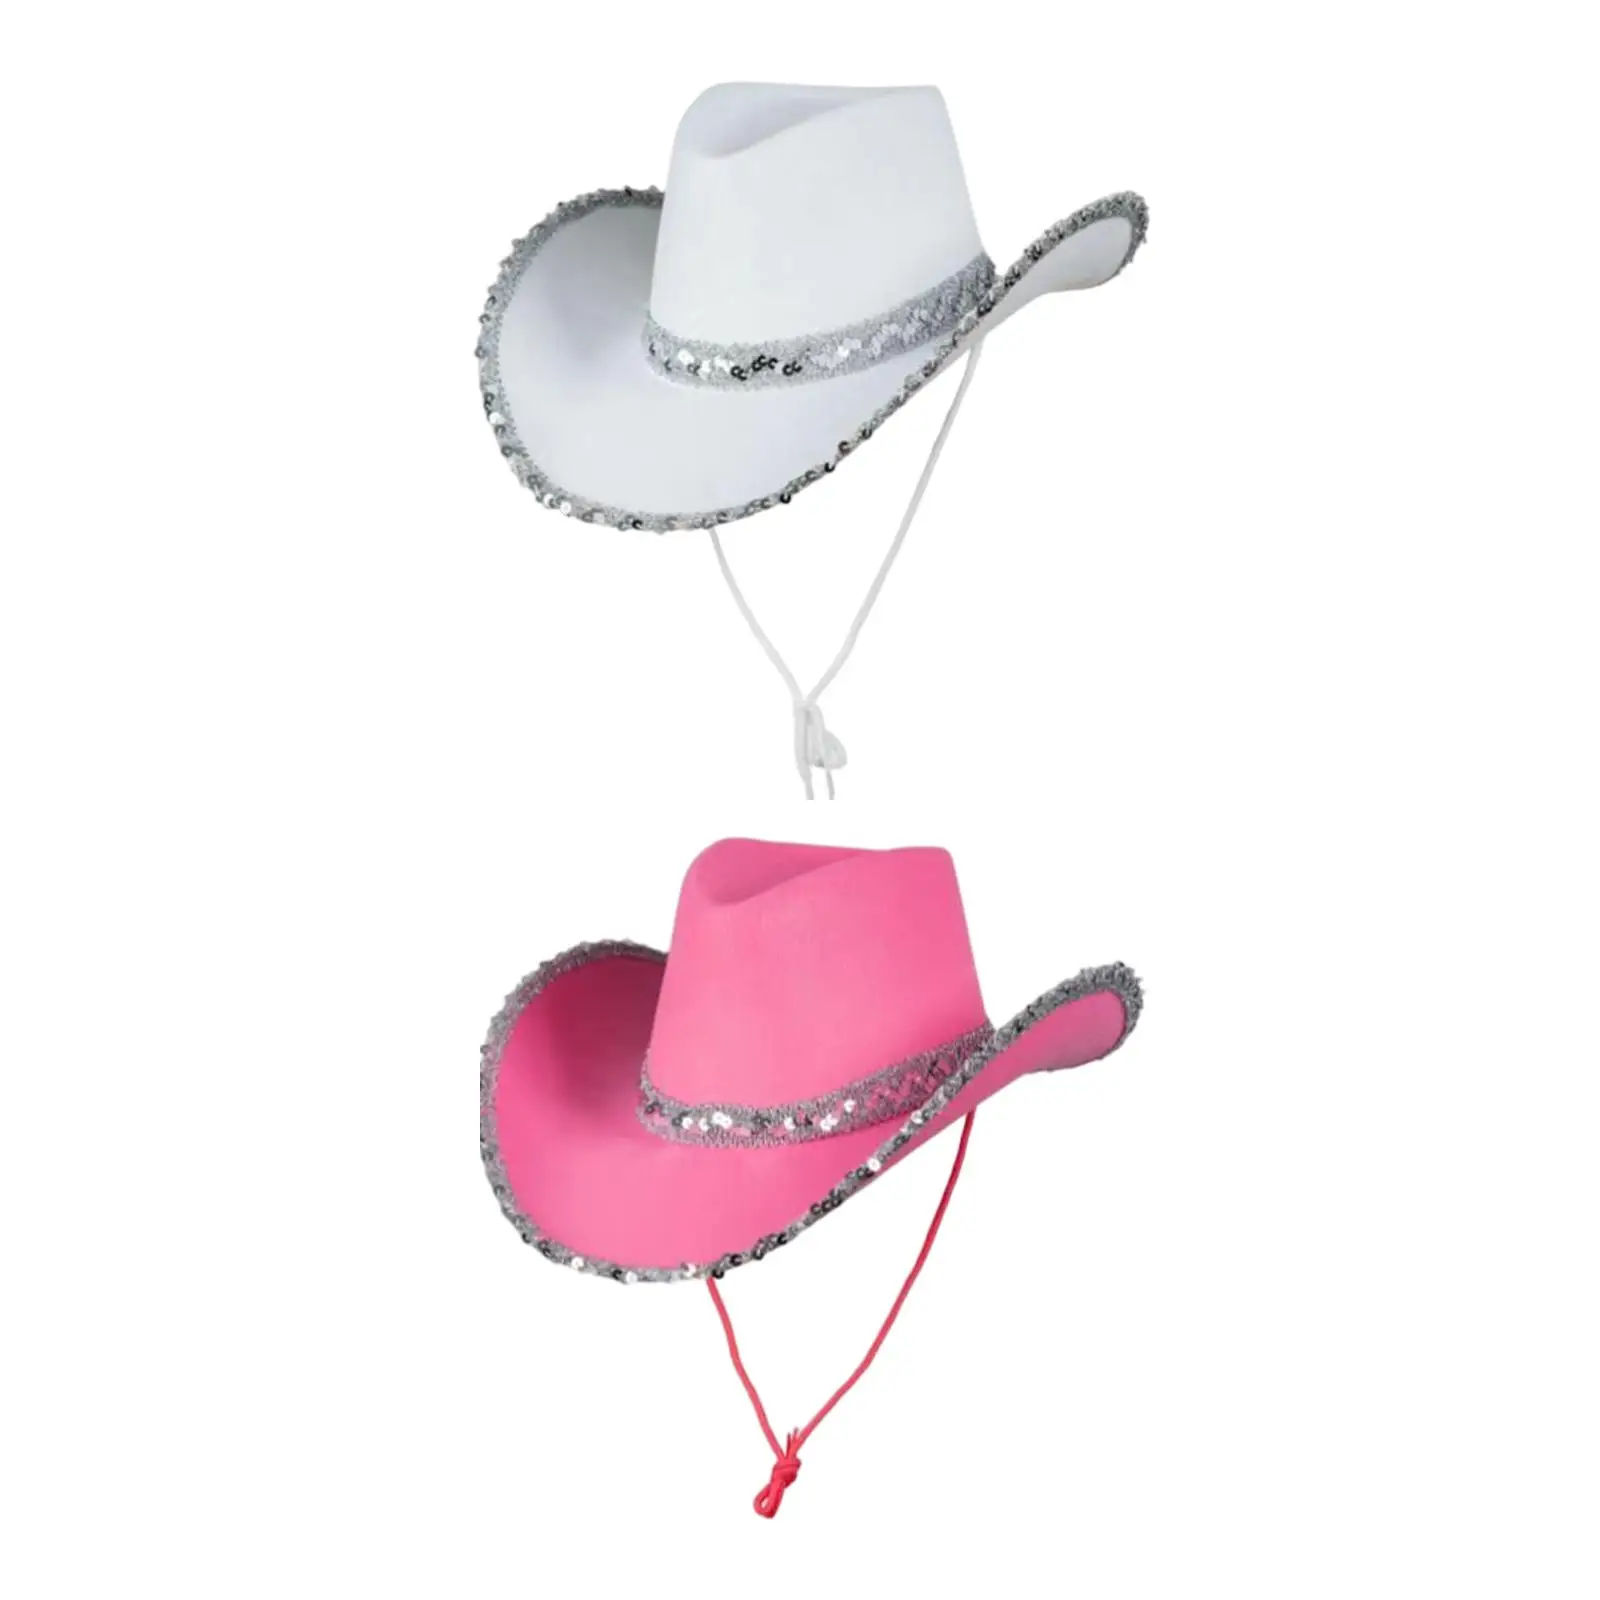 Western Women Cowboy Hat Wide Brim Sequin Edge Sunhat Cowgirl Hats for Engagement Party Wedding Fancy Dress Costume Role Play